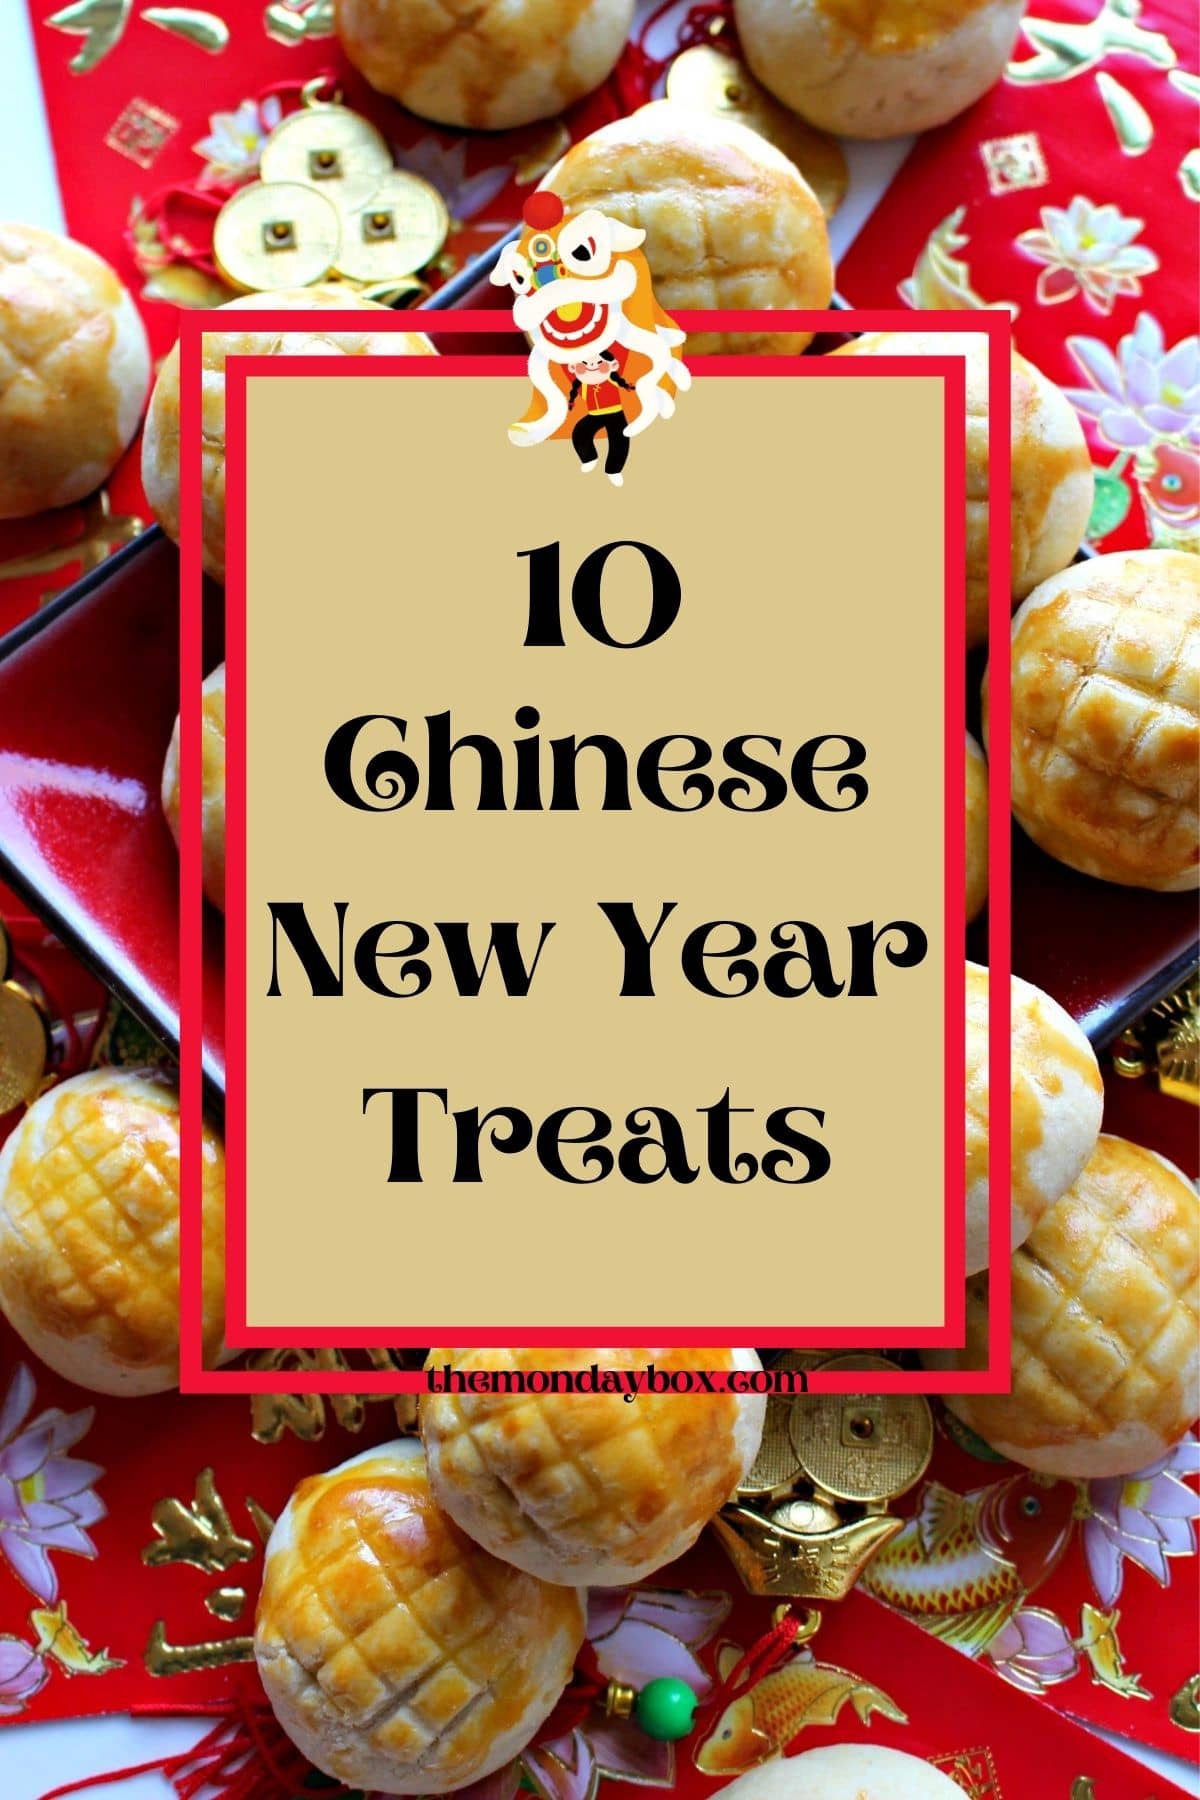 Background pineapple cookies with foreground text in box "10 Chinese New Year Treats".